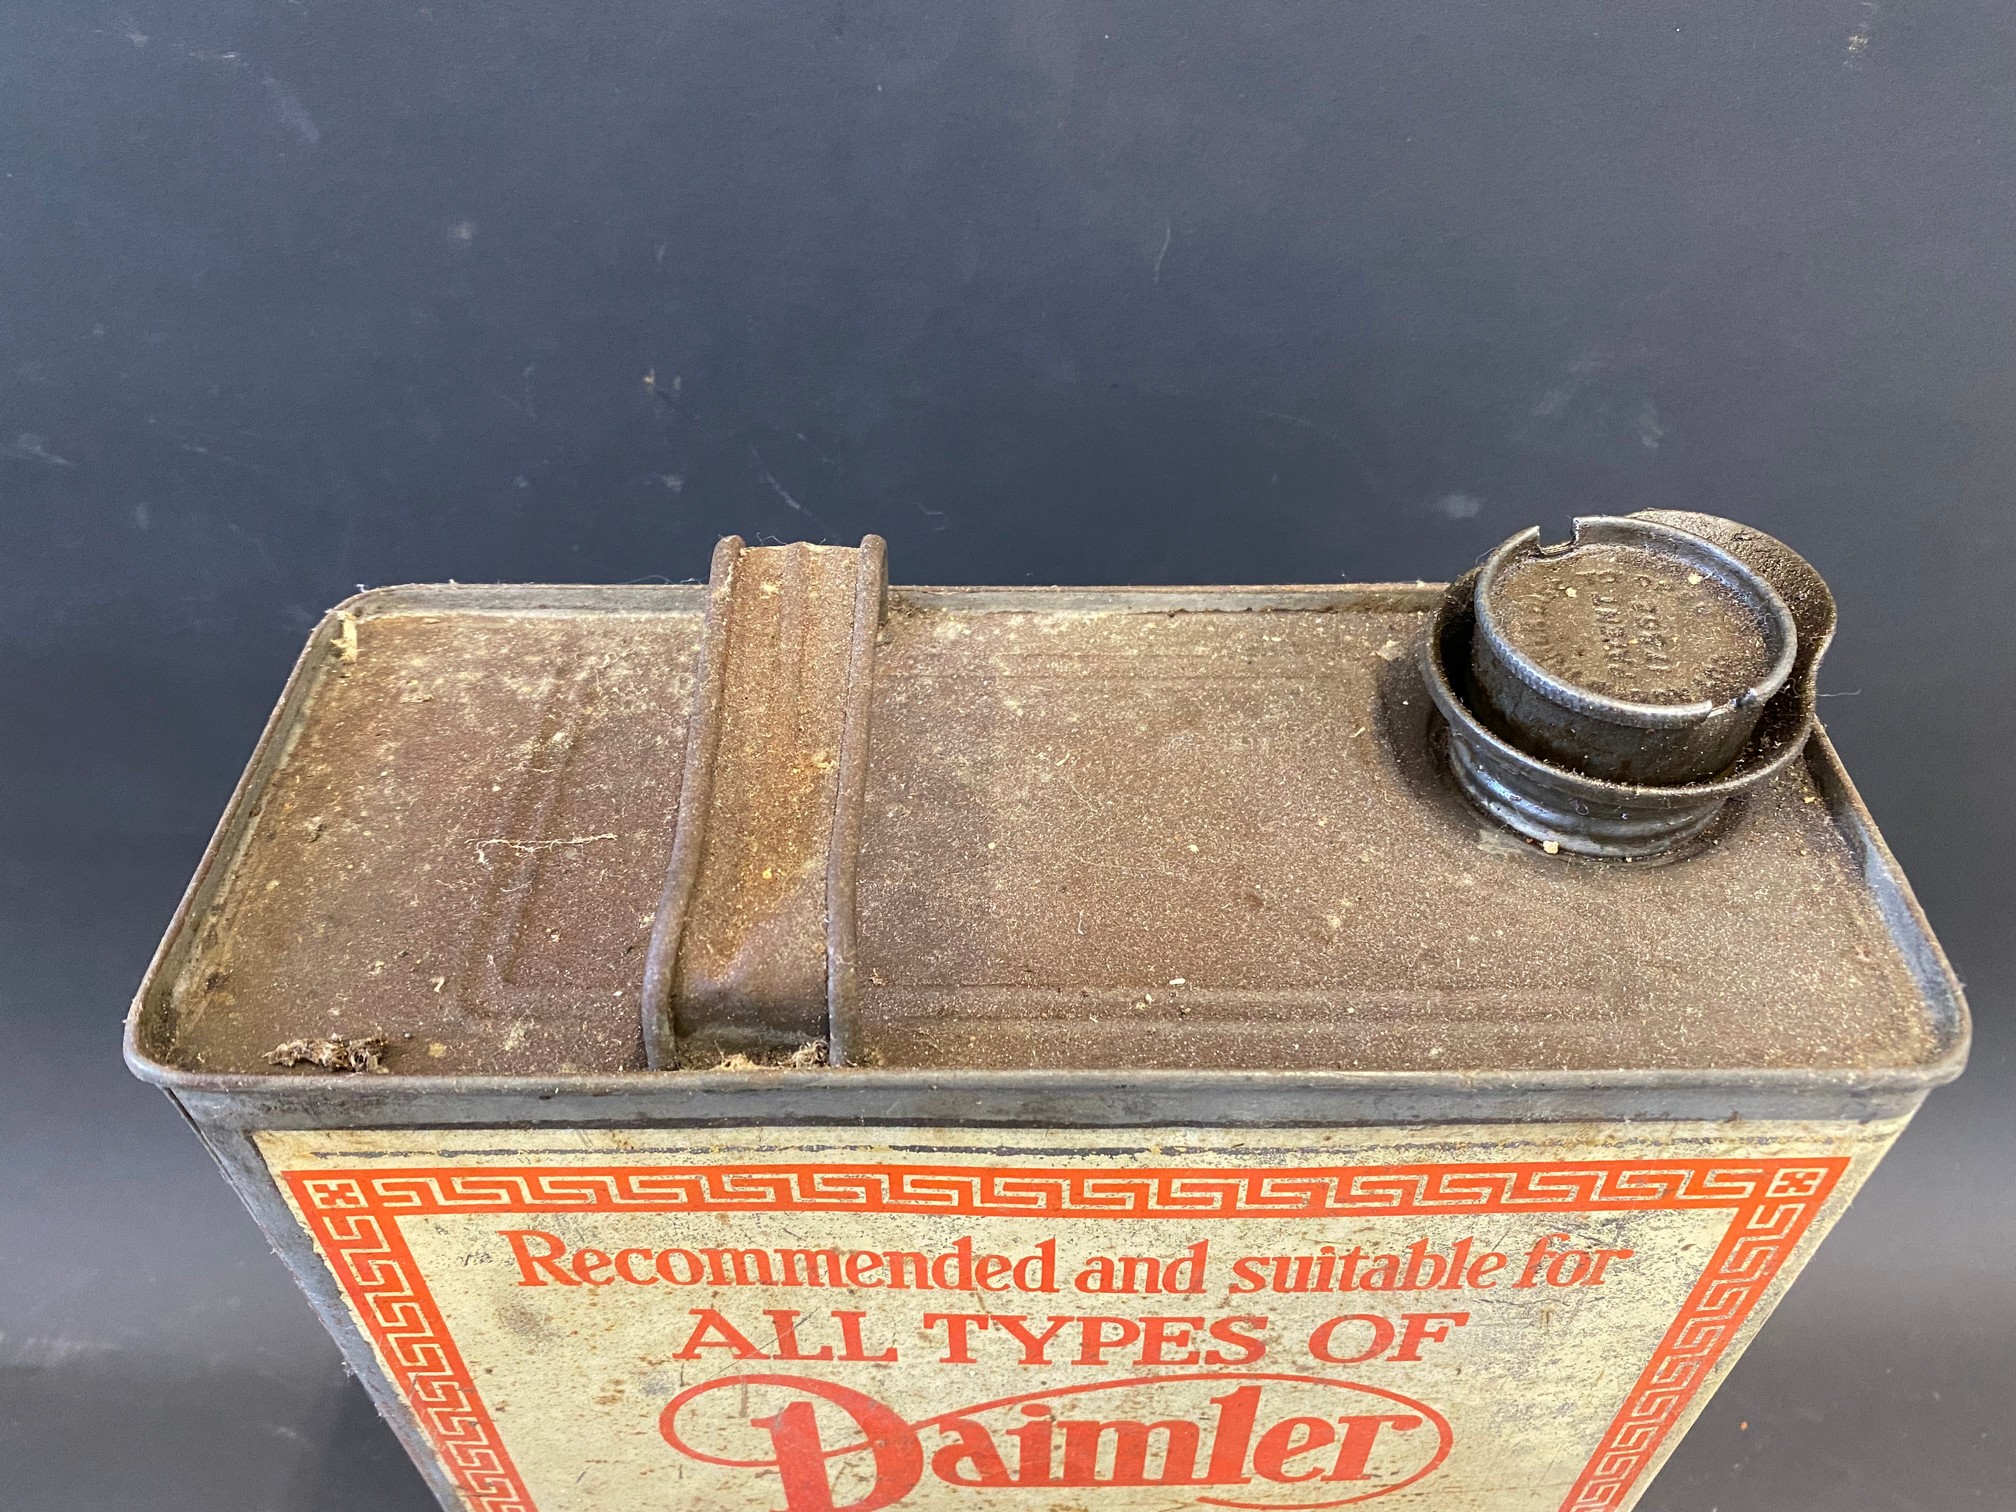 A self-changing oil for Daimler Lanchester & BSA cars gallon can. - Image 5 of 6